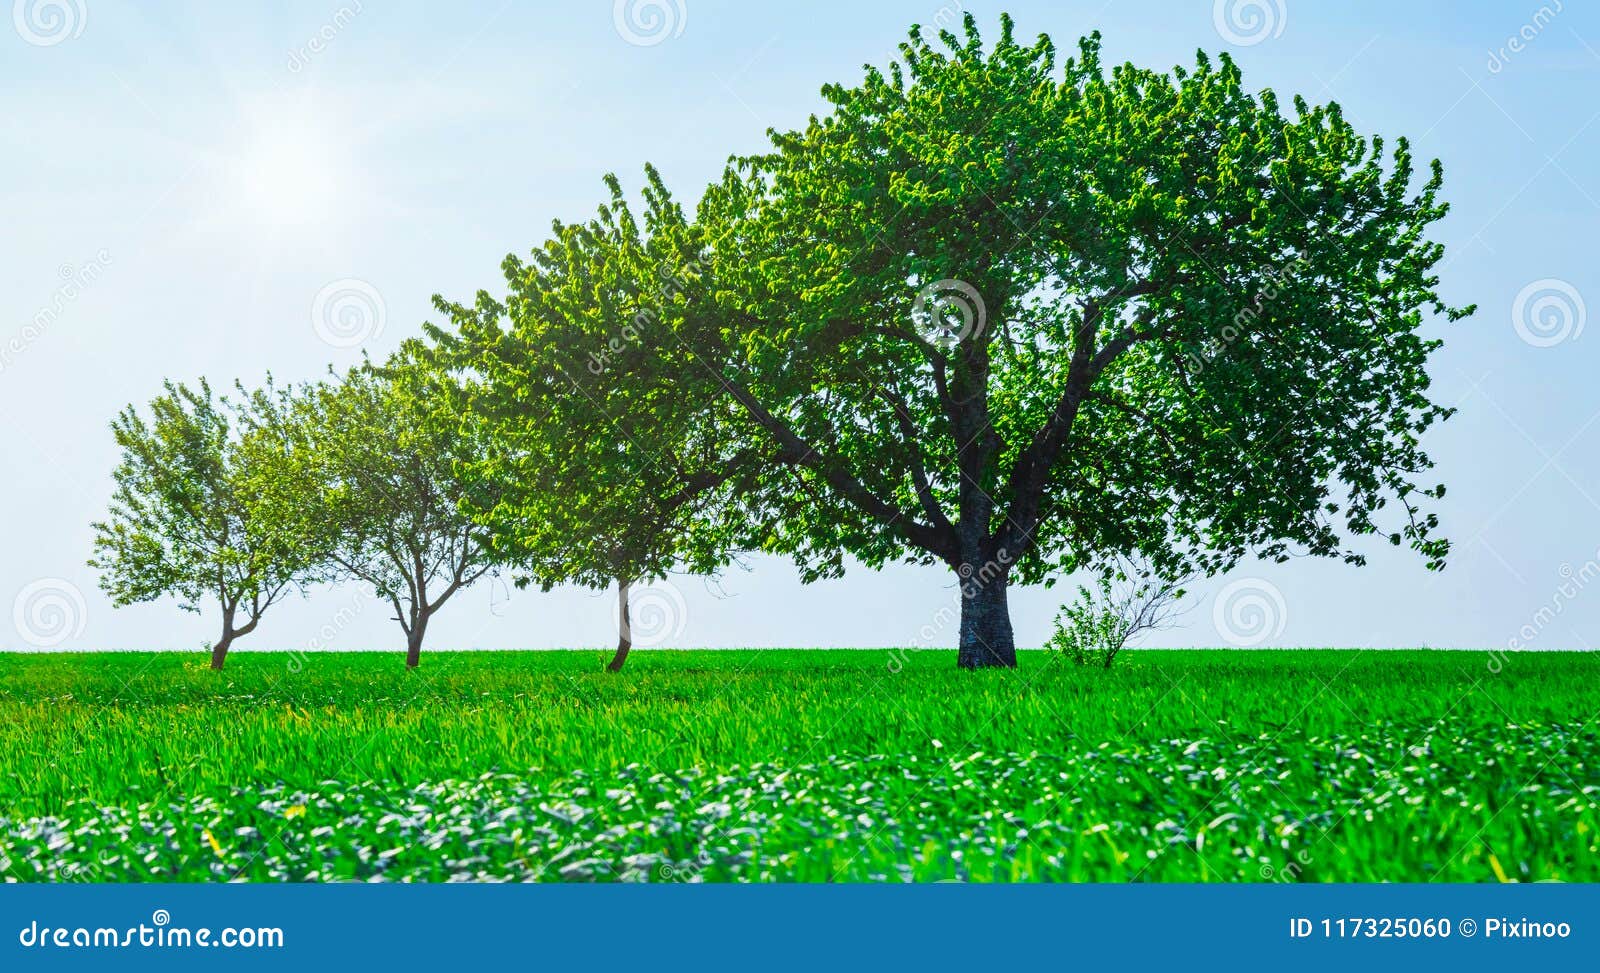 trees in a field. generation growth legacy family concept